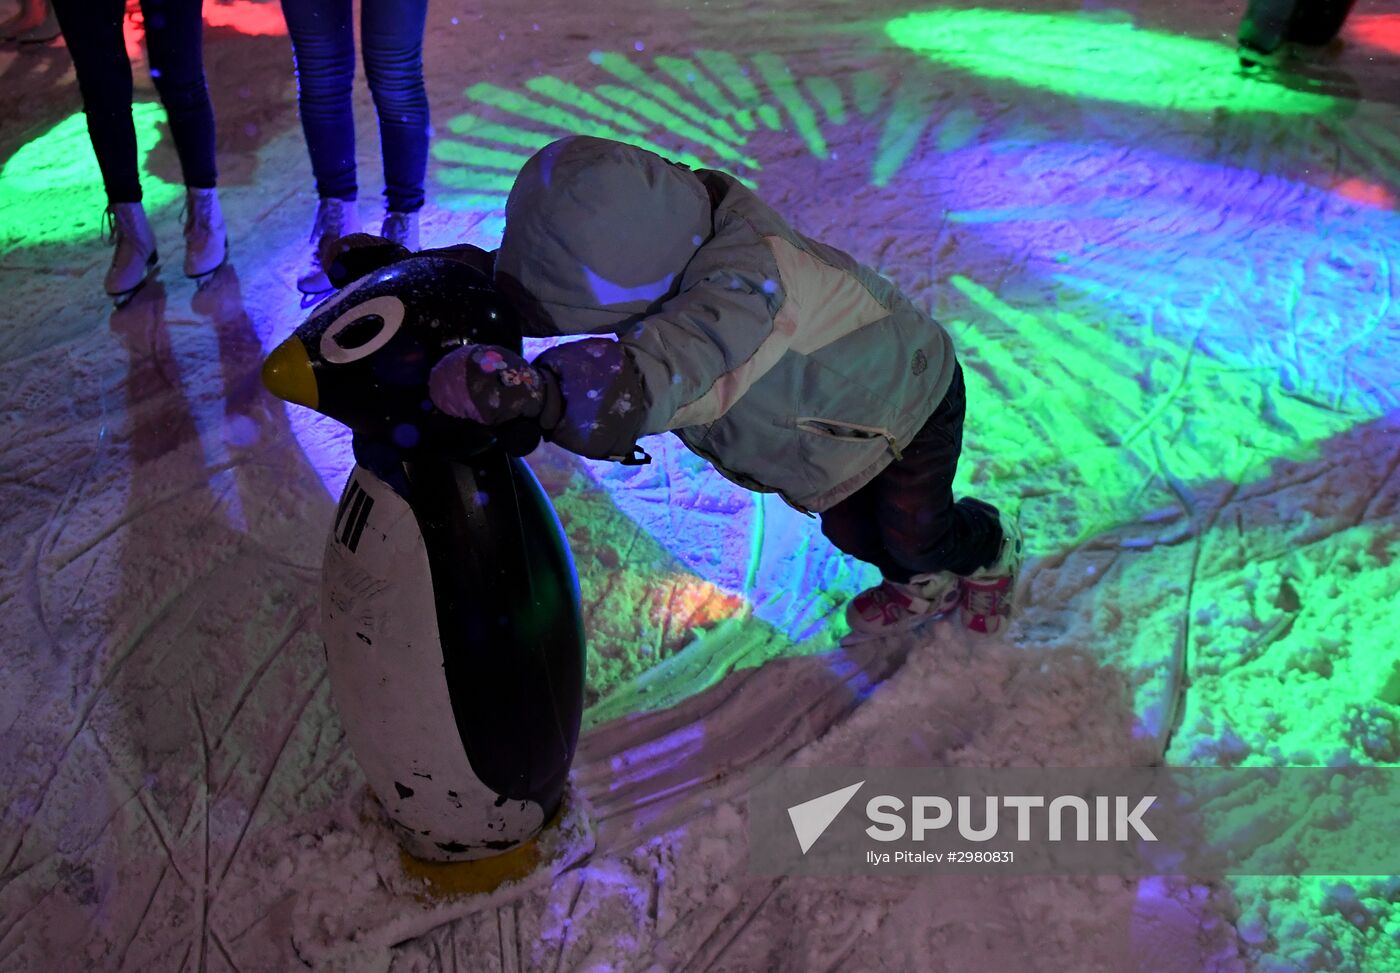 Skating rink opened in Moscow Hermitage Garden